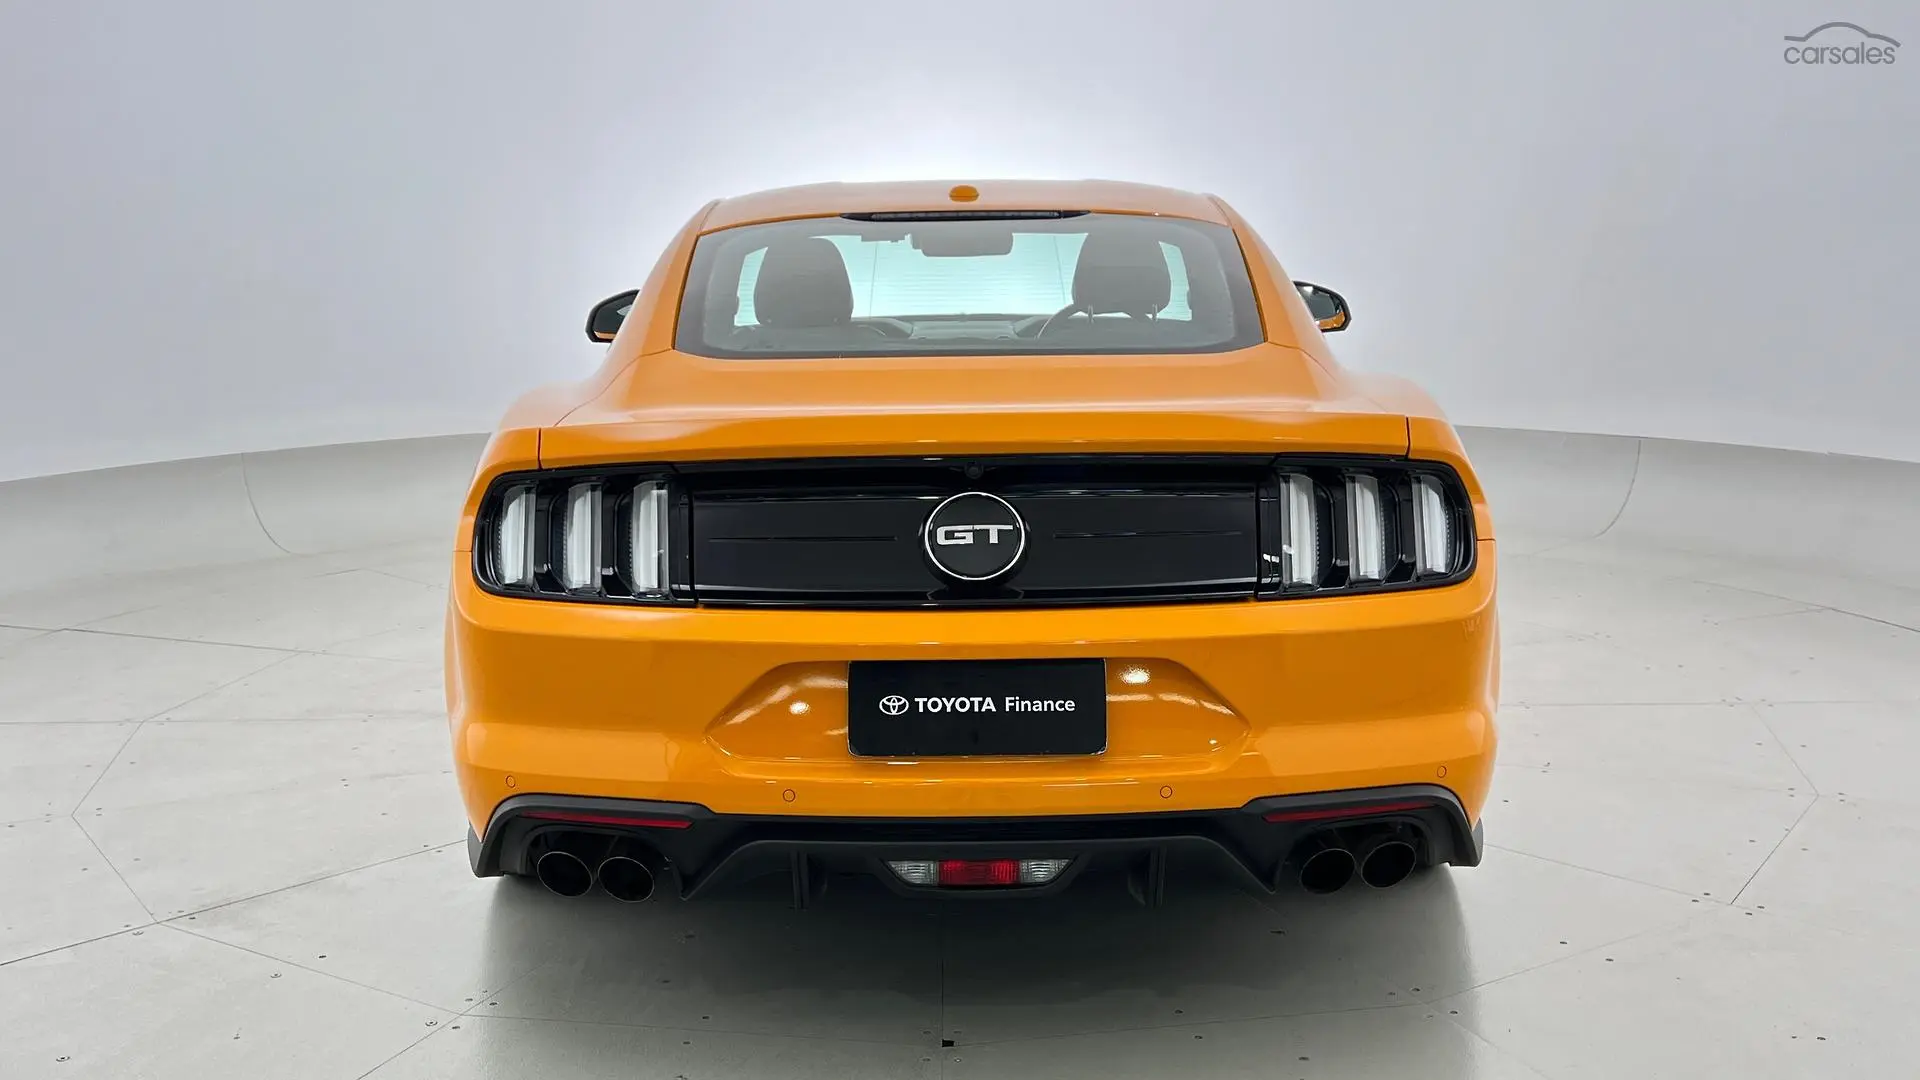 2019 Ford Mustang Image 6